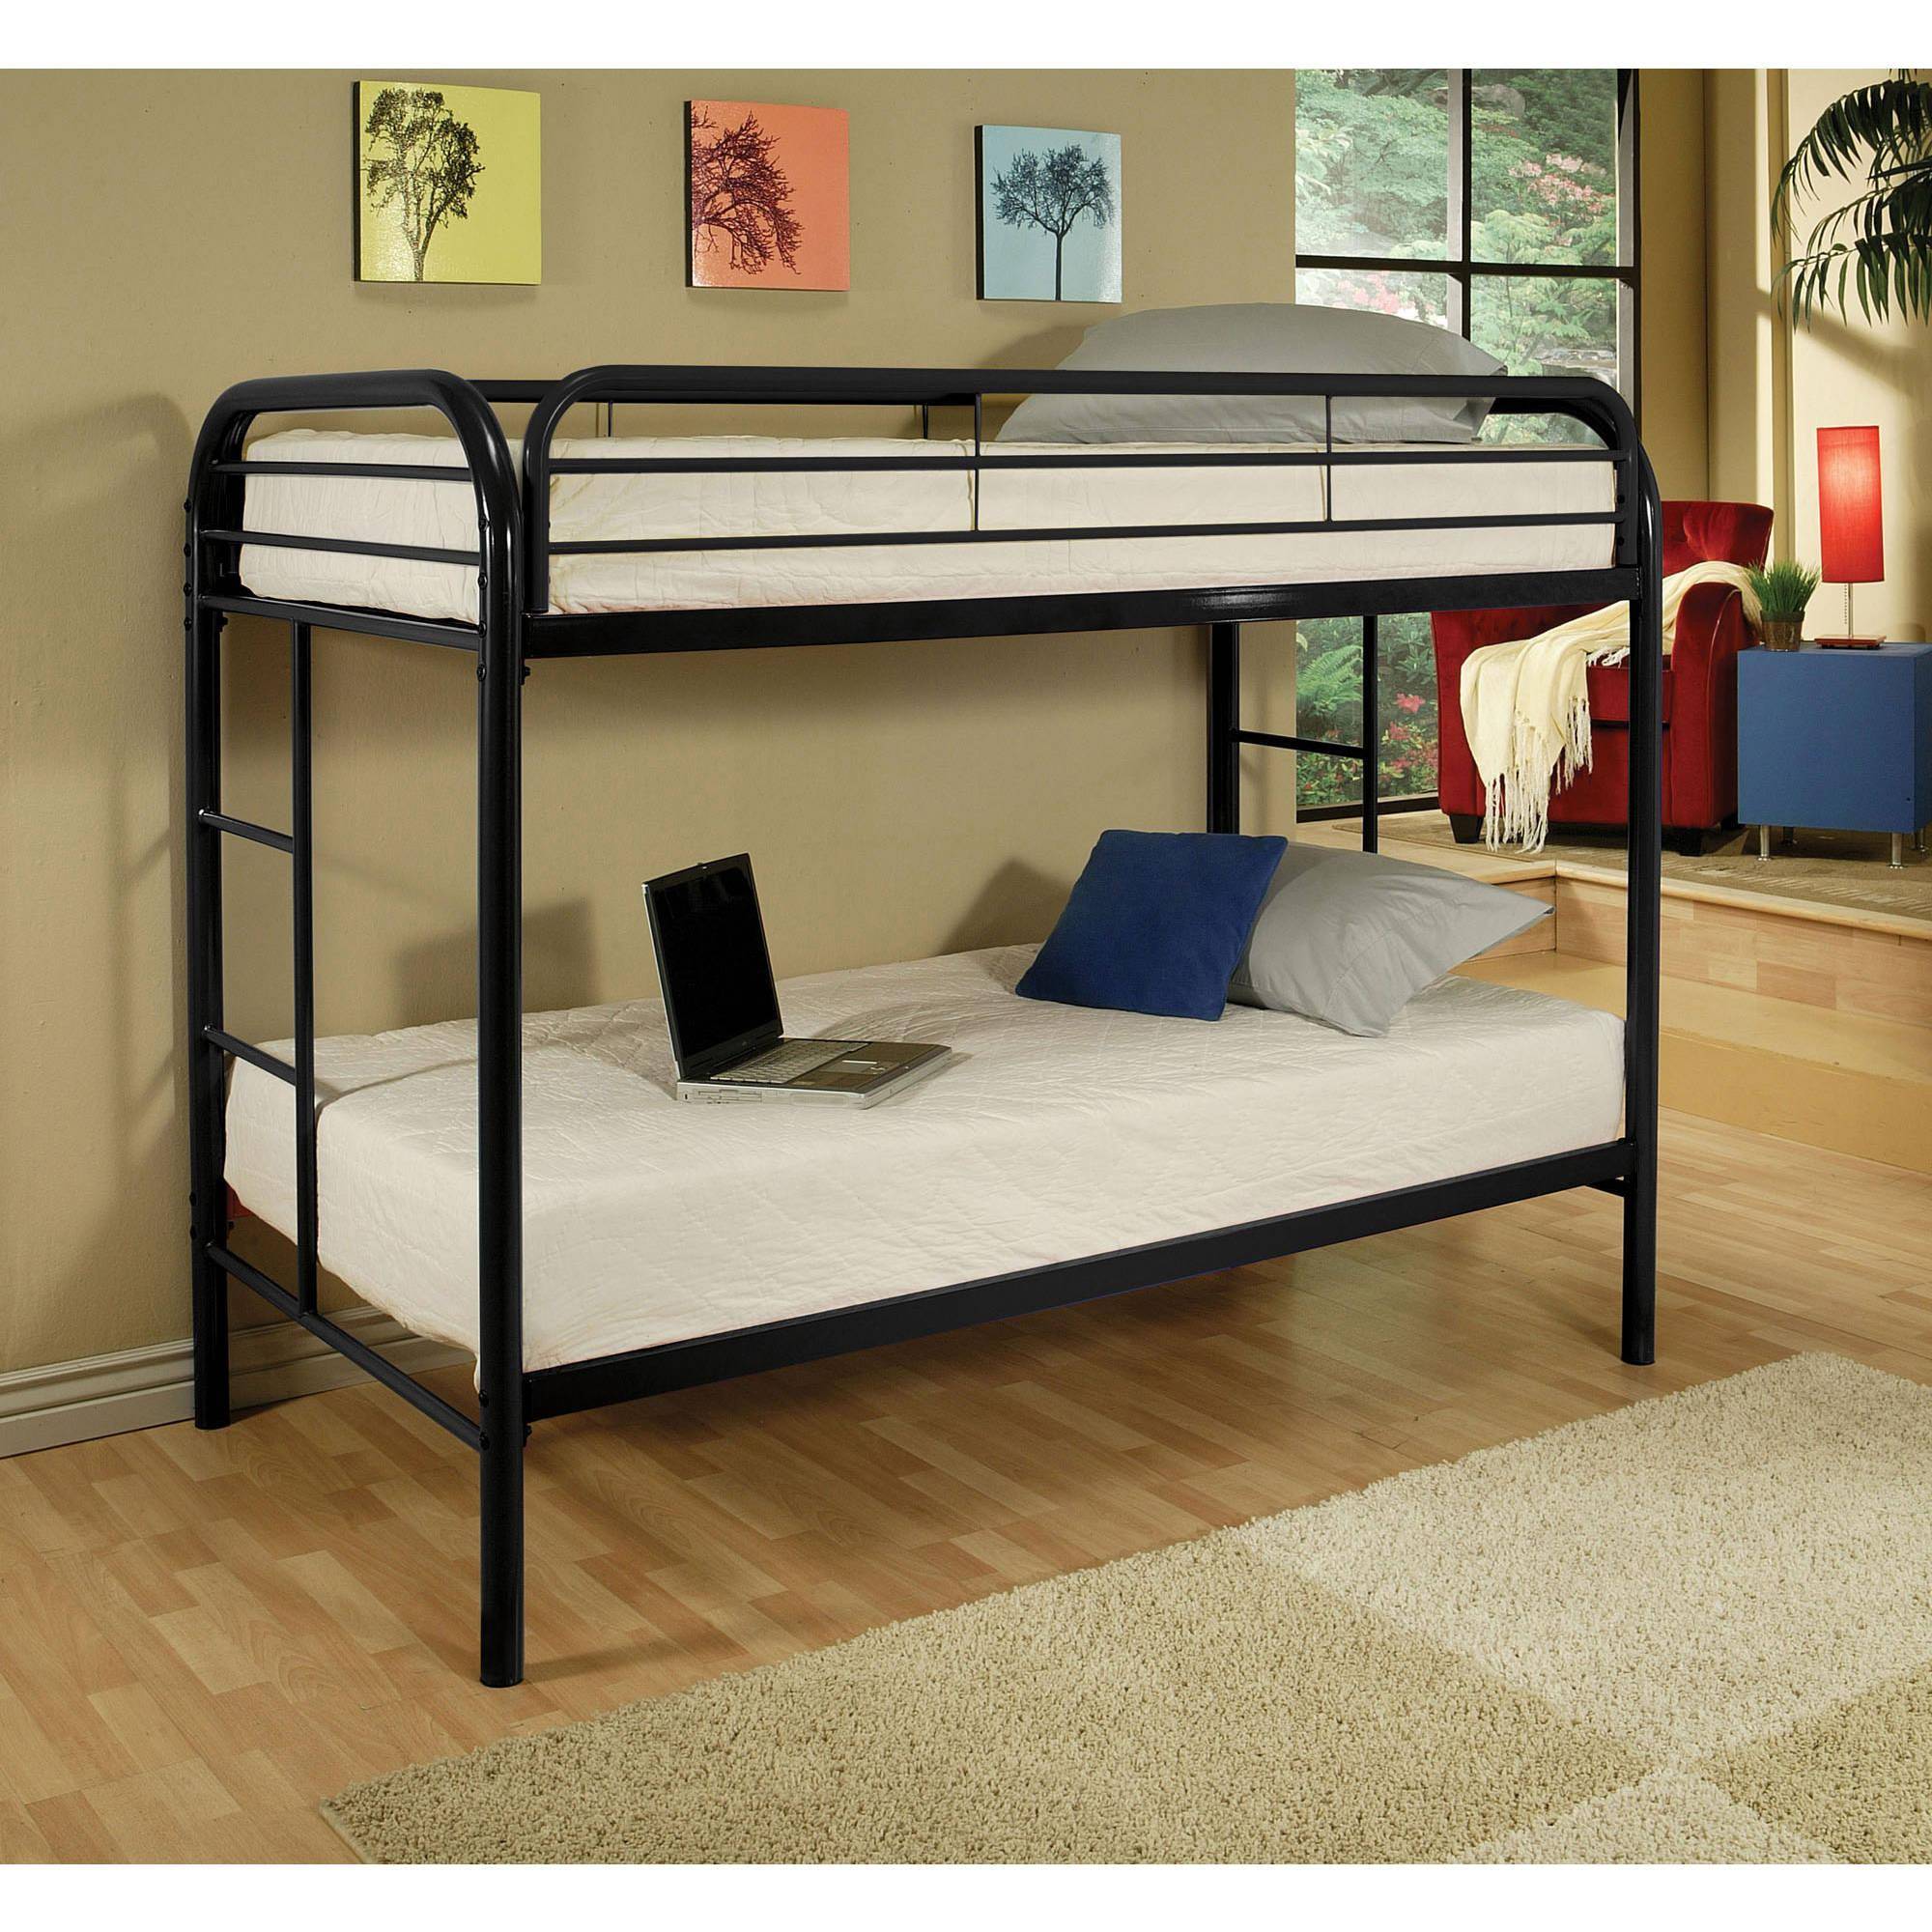 black twin beds for kids photo - 9